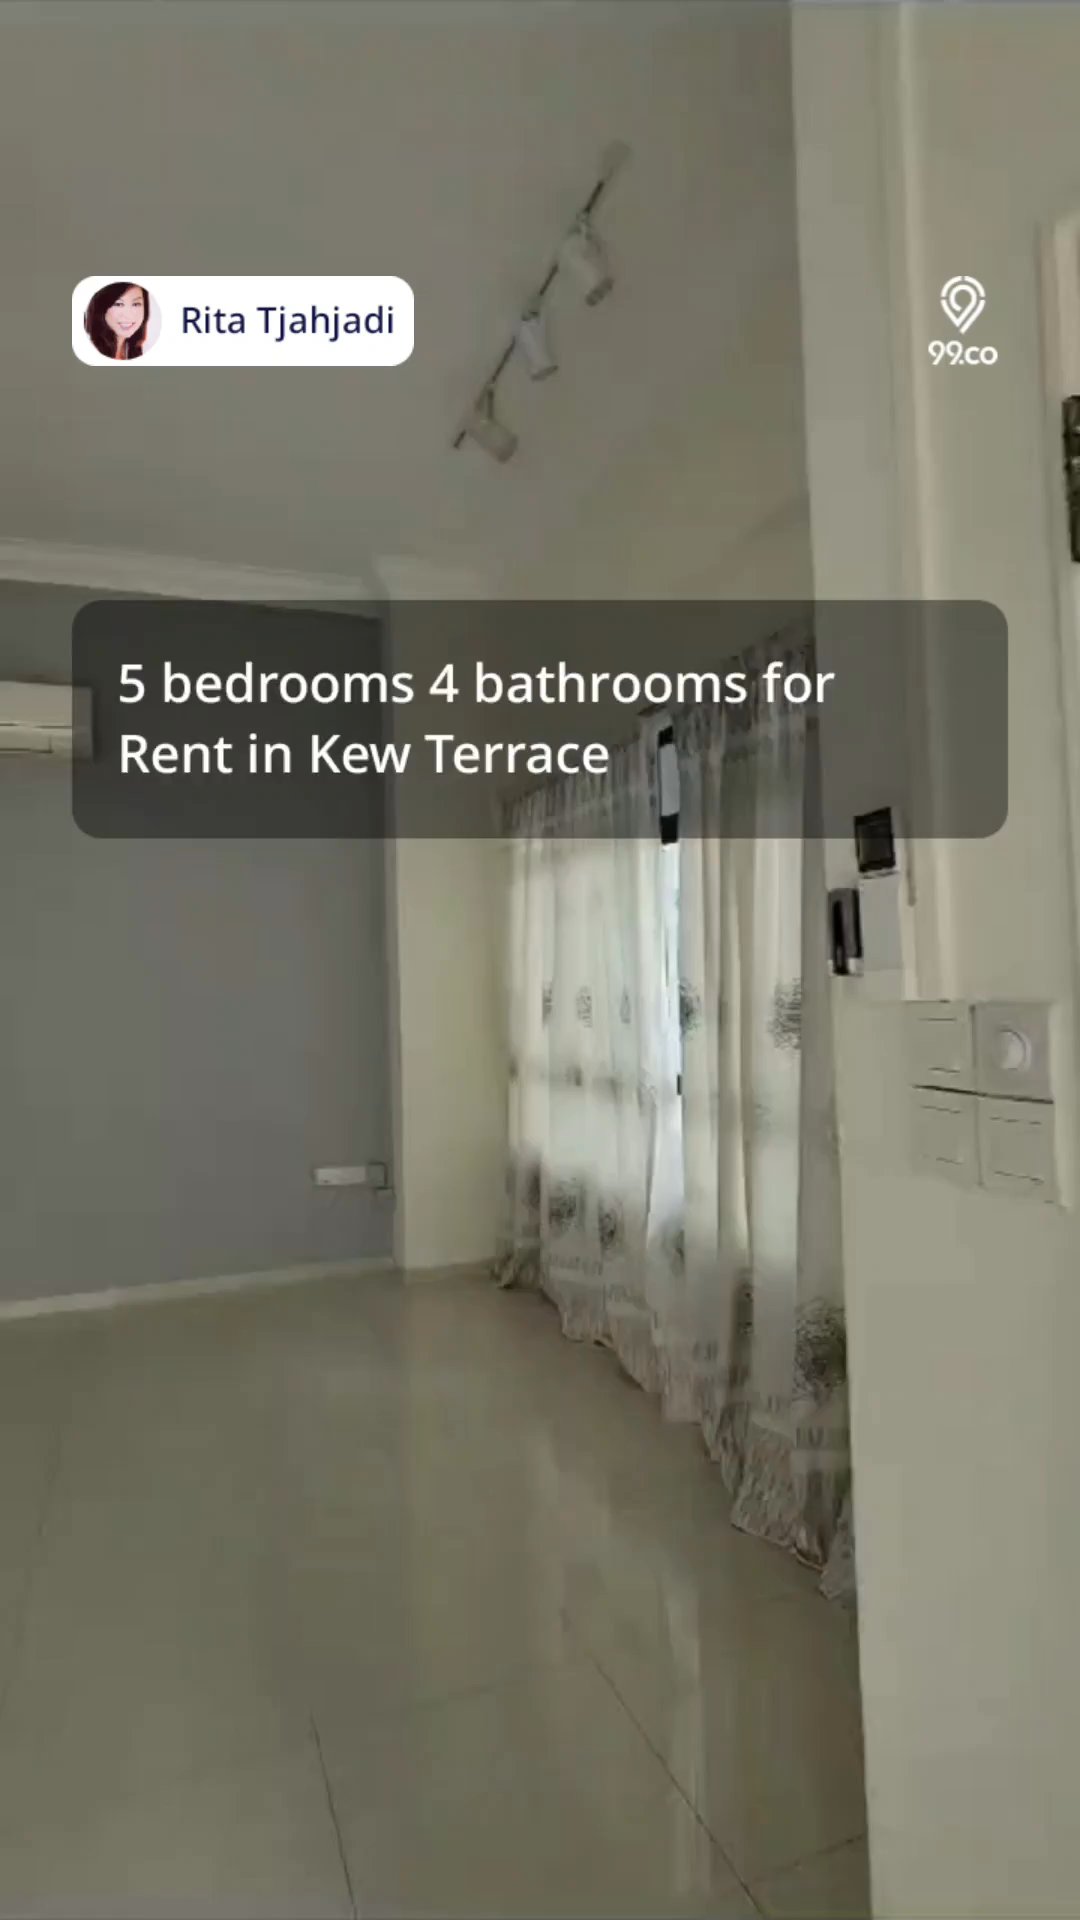 undefined of 3,500 sqft (built-up) Landed House for Rent in Kew Terrace